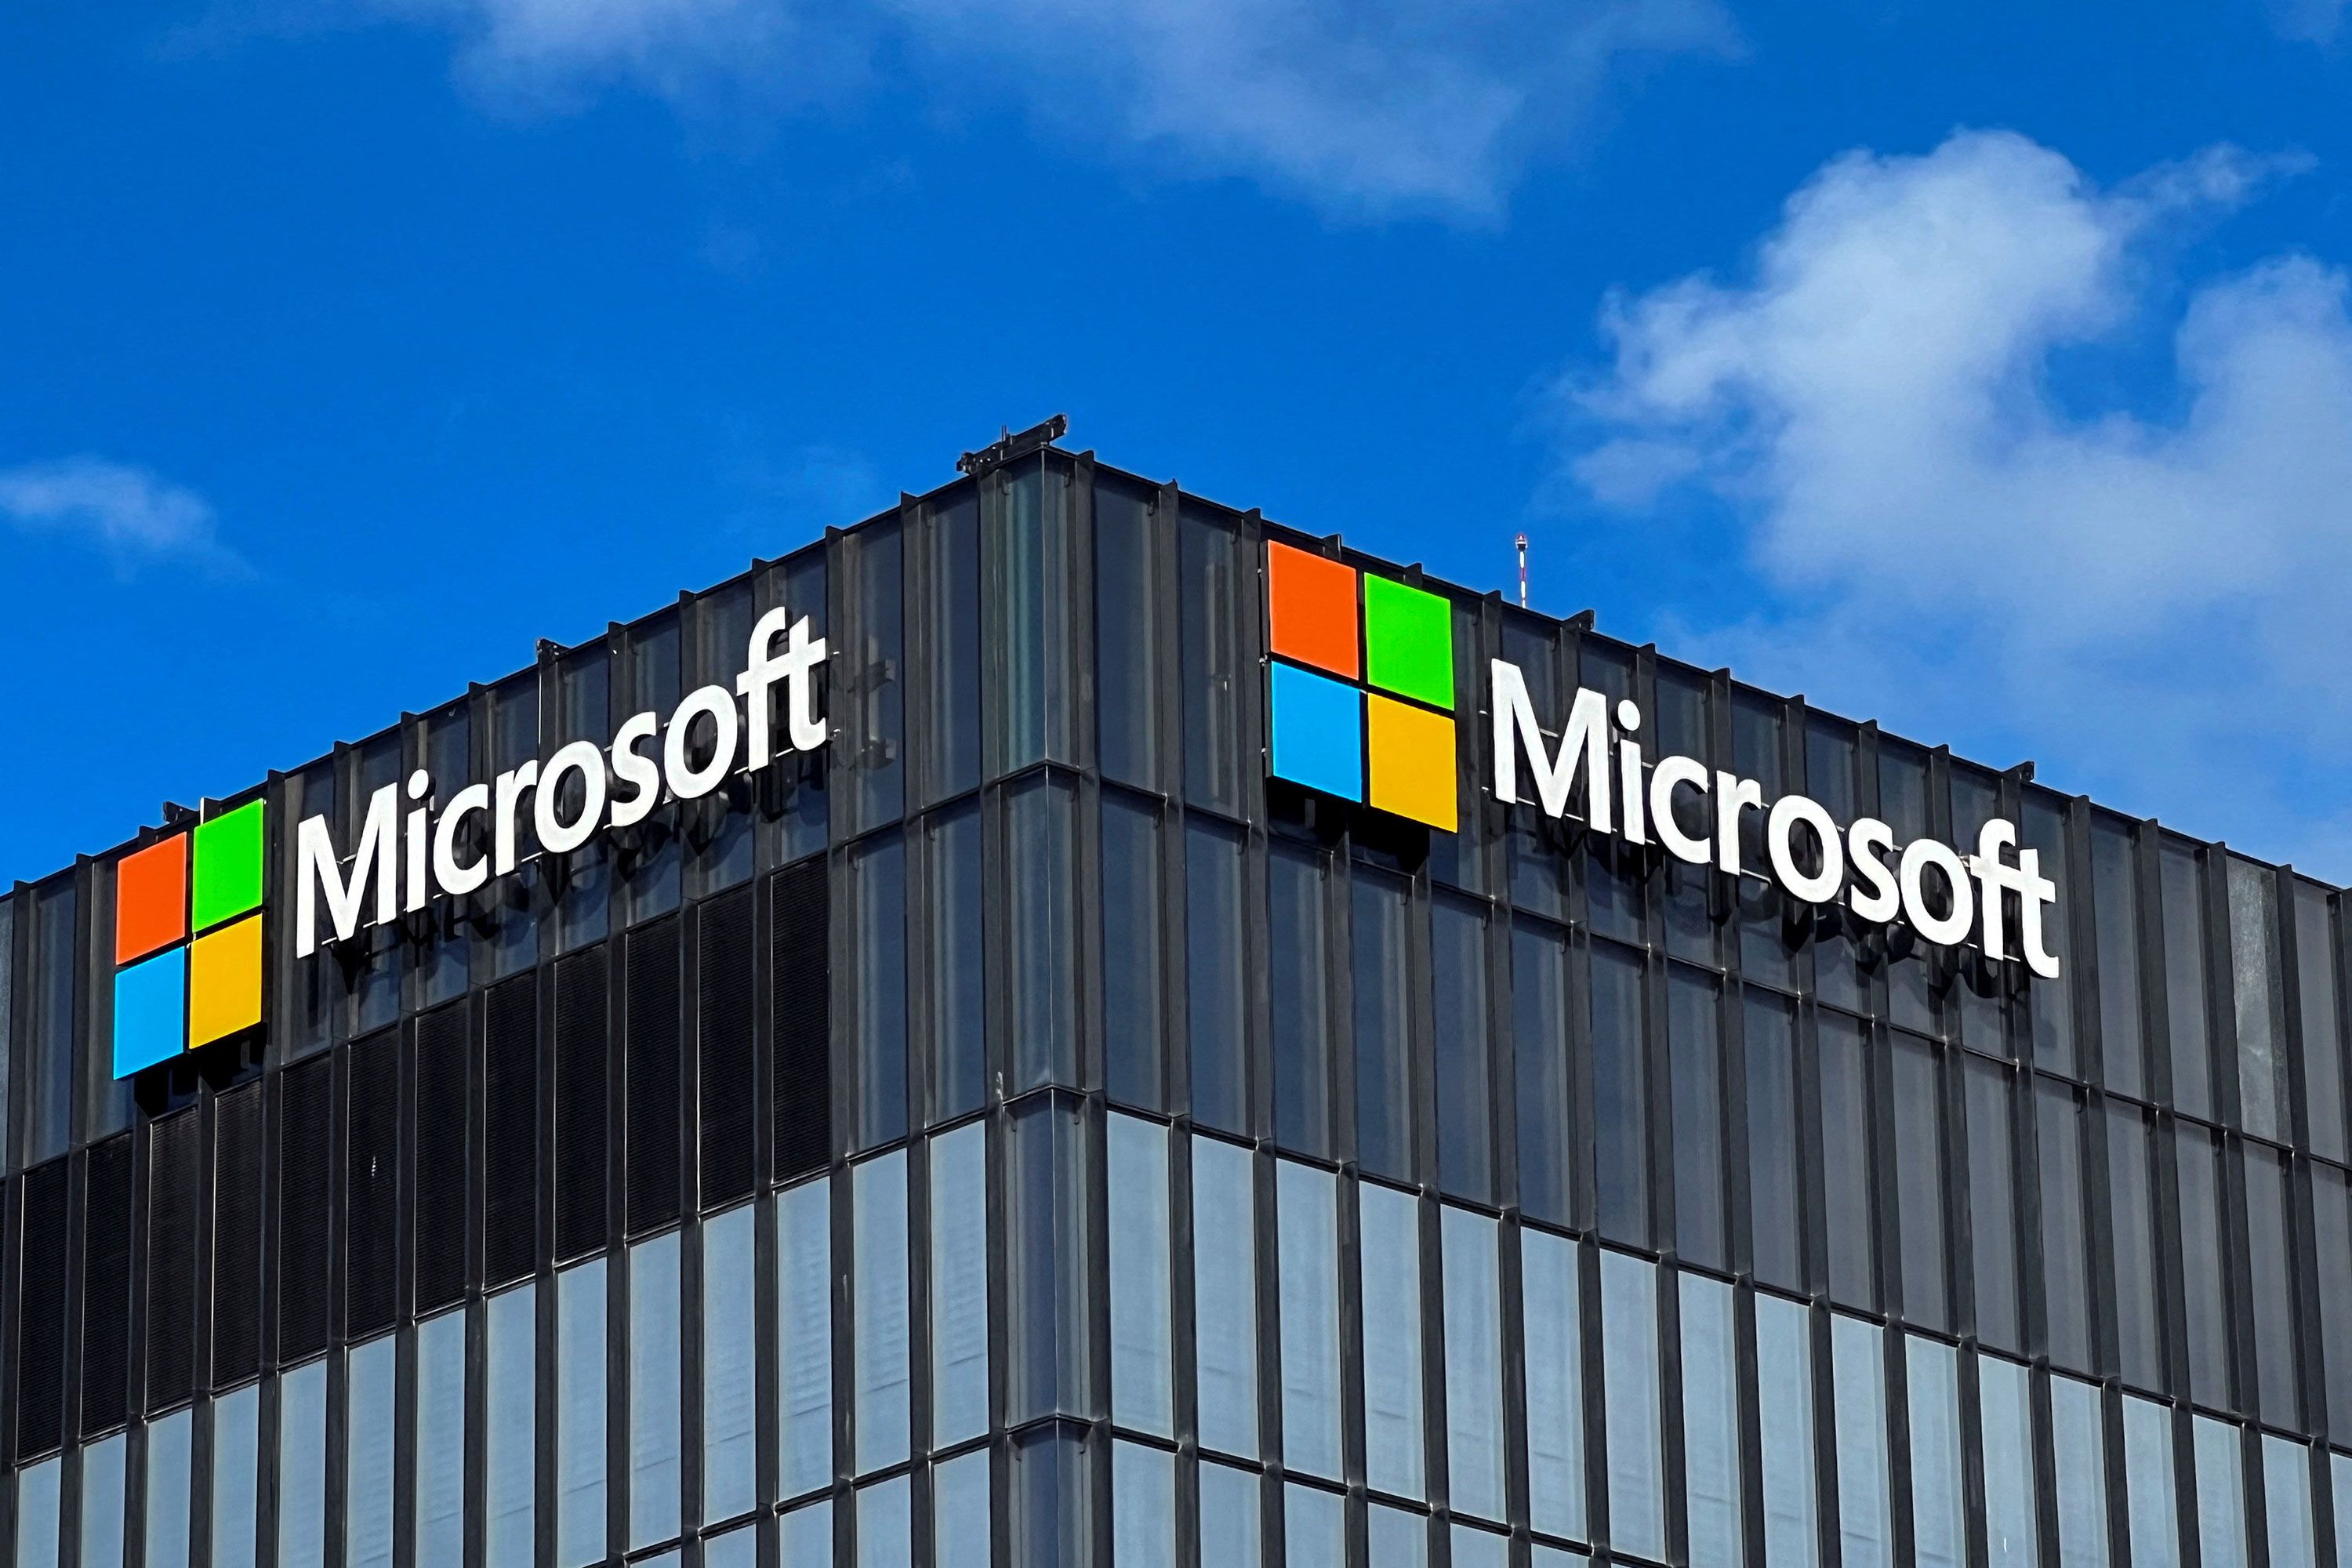 Microsoft moves into new NYC office space following renovation